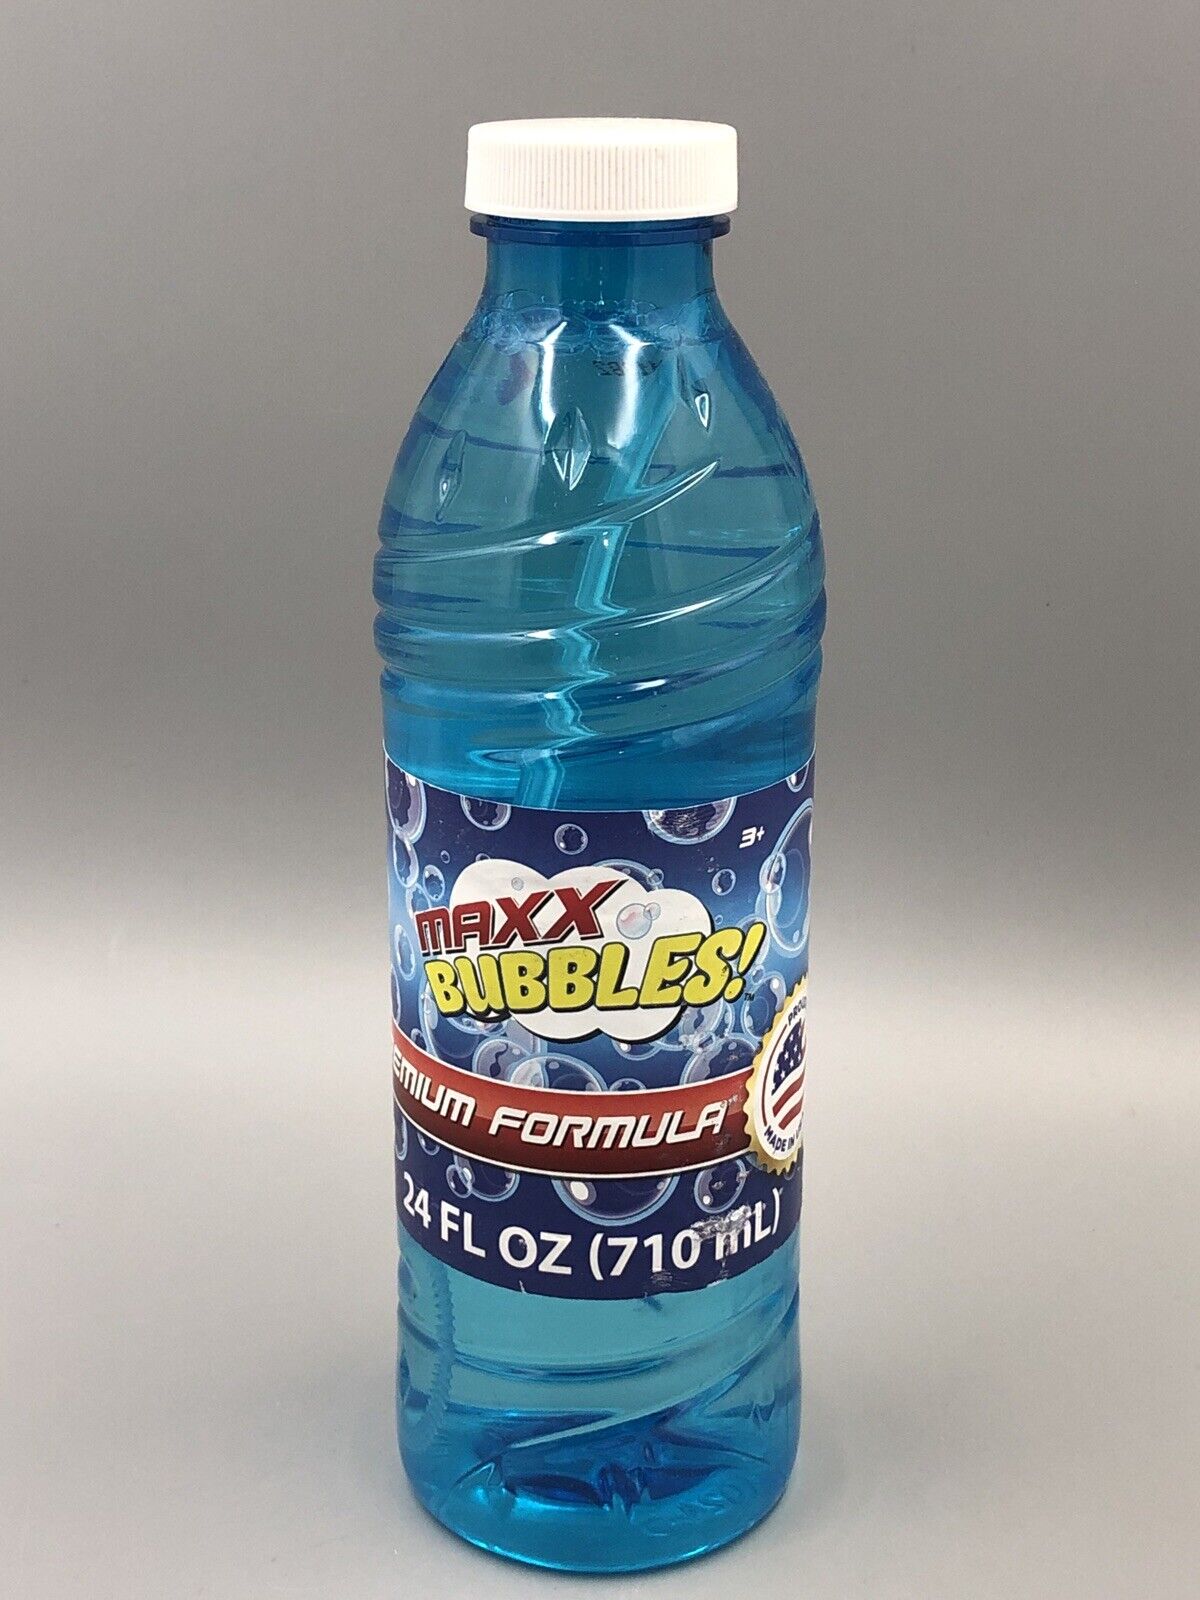 Maxx Bubbles Deluxe Bubble 2021 Bottle Credence With 24 Wand 4+ oz Age